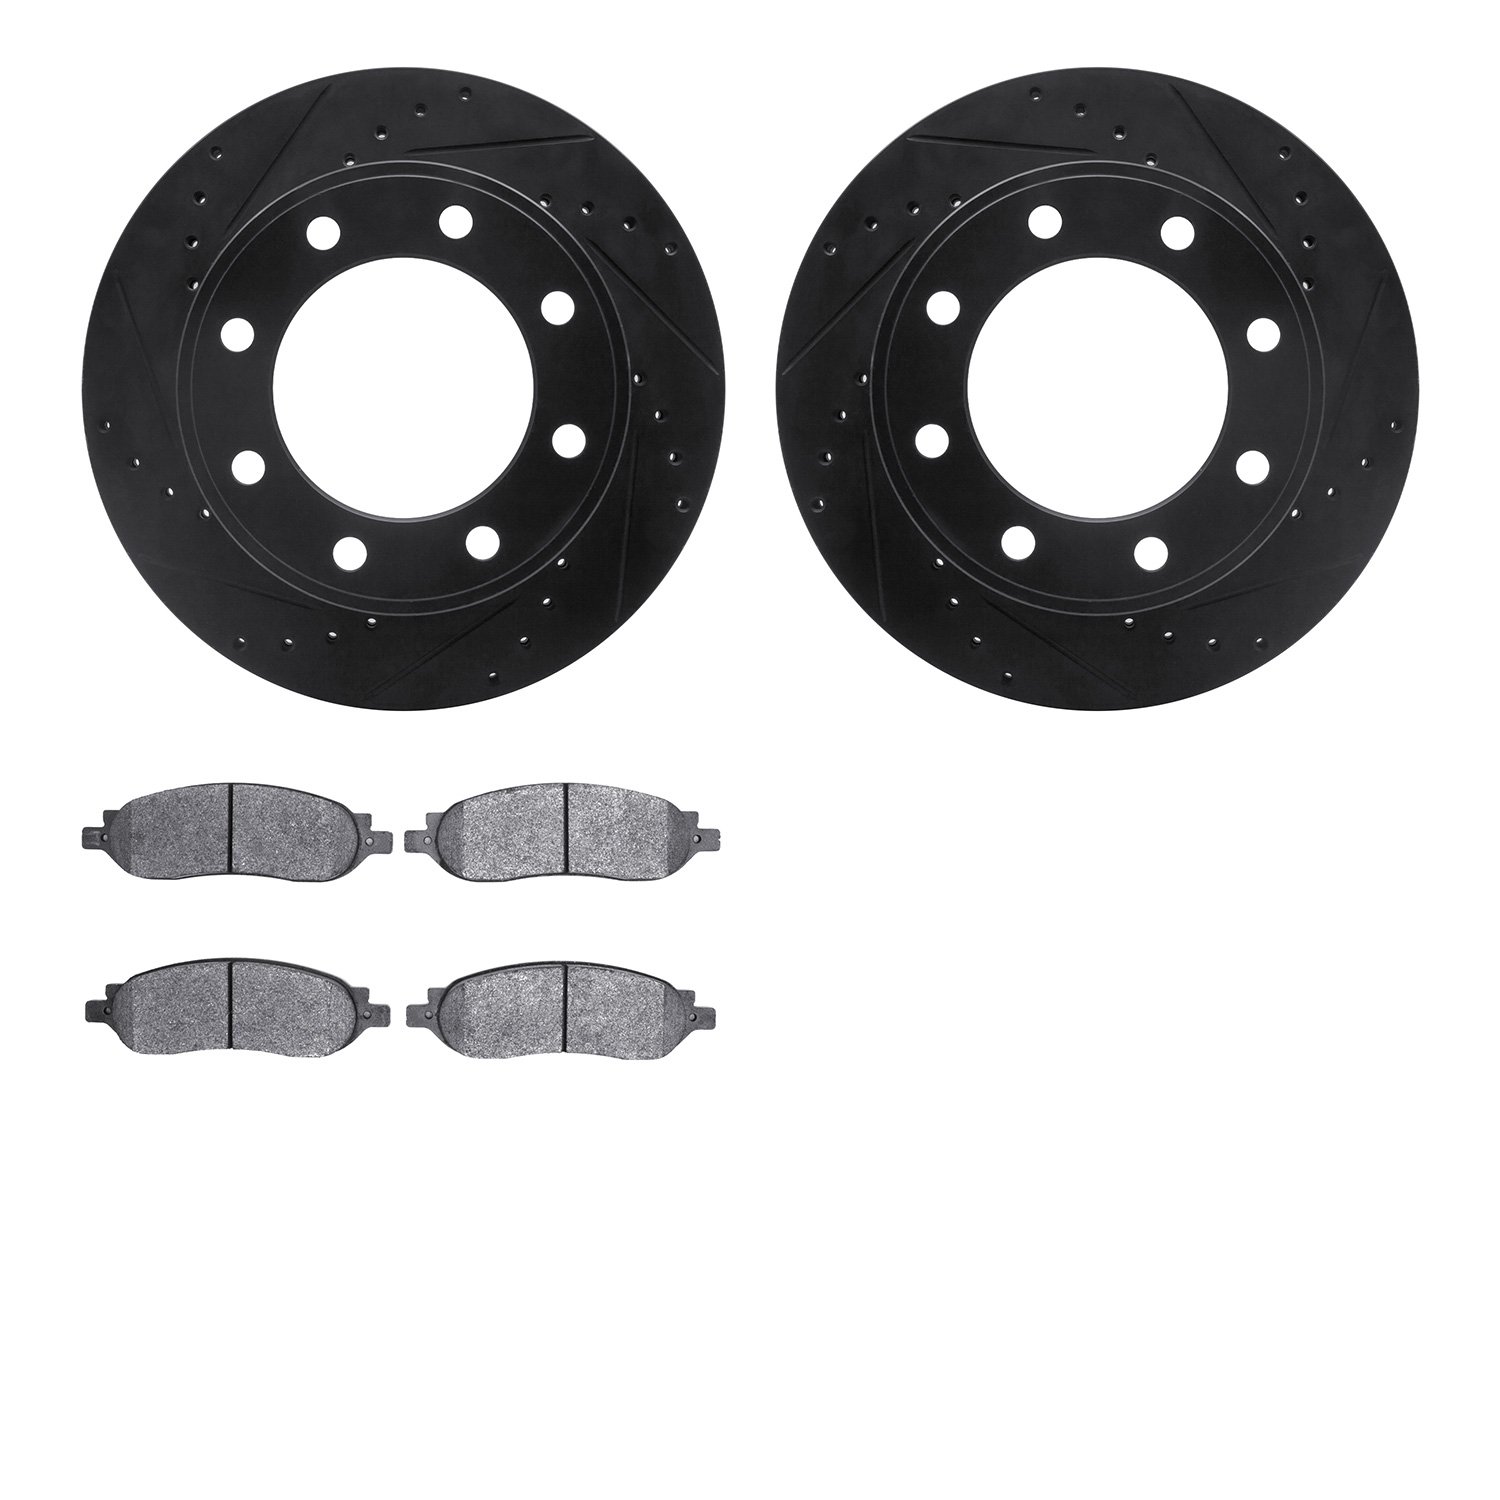 8402-54083 Drilled/Slotted Brake Rotors with Ultimate-Duty Brake Pads Kit [Black], 2005-2007 Ford/Lincoln/Mercury/Mazda, Positio